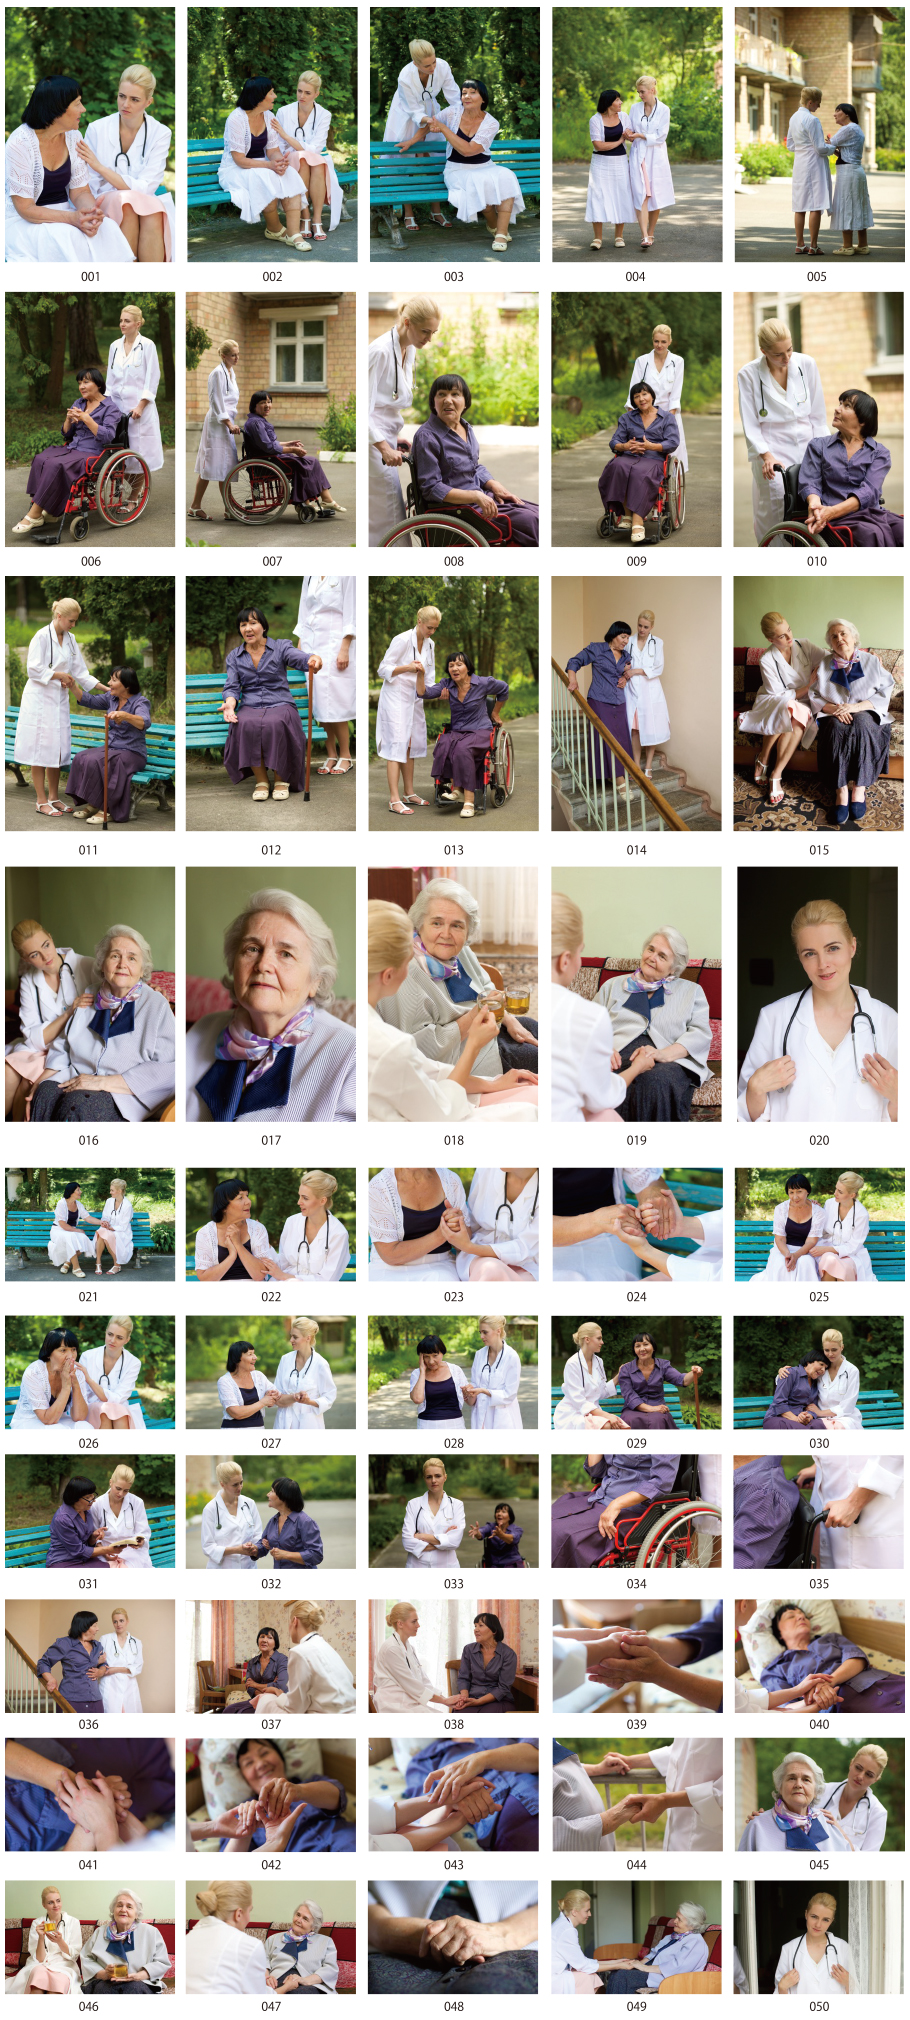 The elderly and health care Photos vol.2